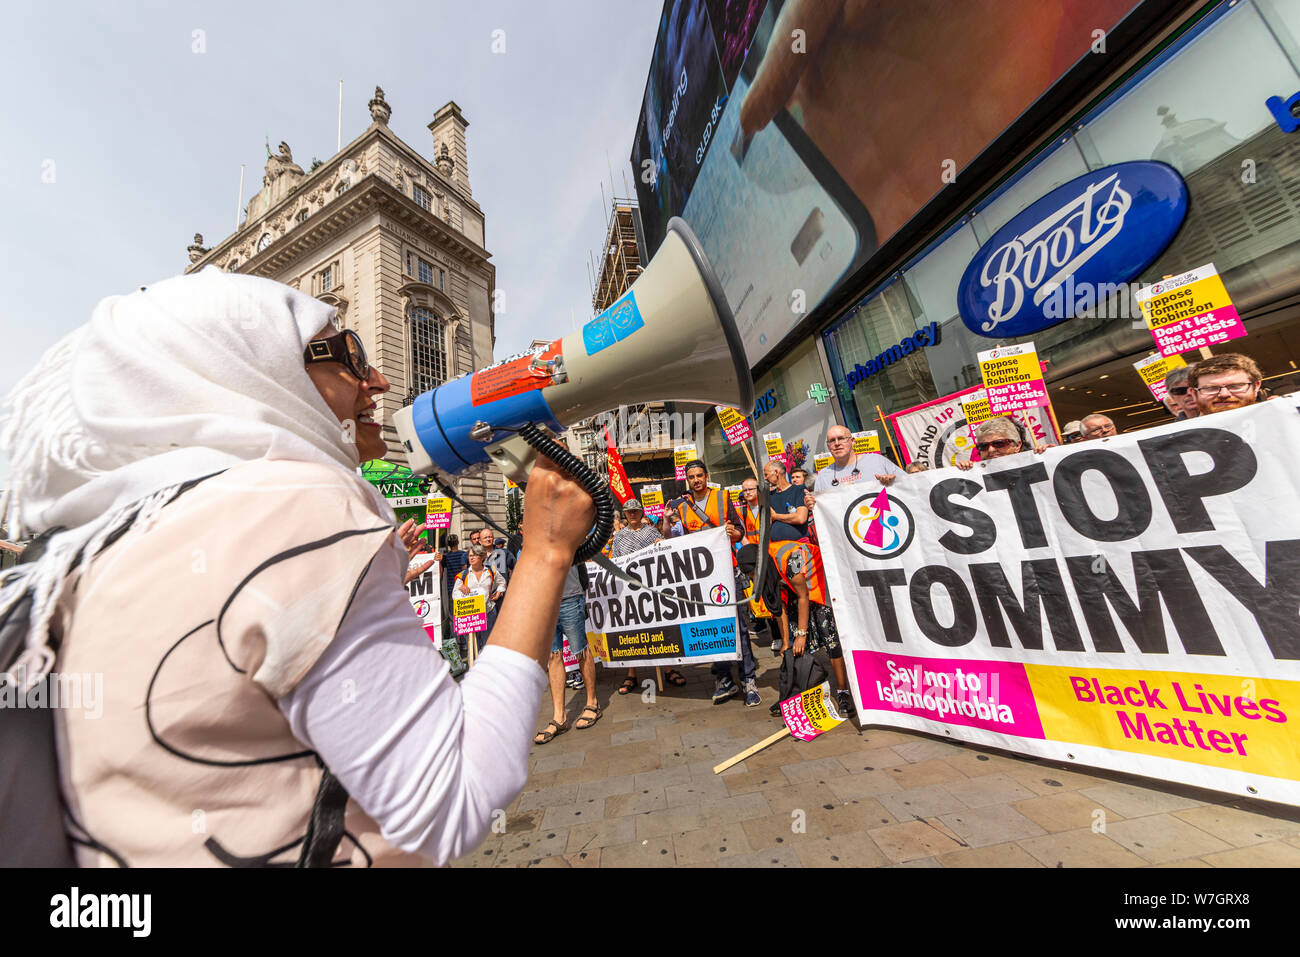 Anti Fascist protesters in opposition at Free Tommy Robinson protest rally In London, UK. Female Muslim chanting through a loud hailer, megaphone Stock Photo